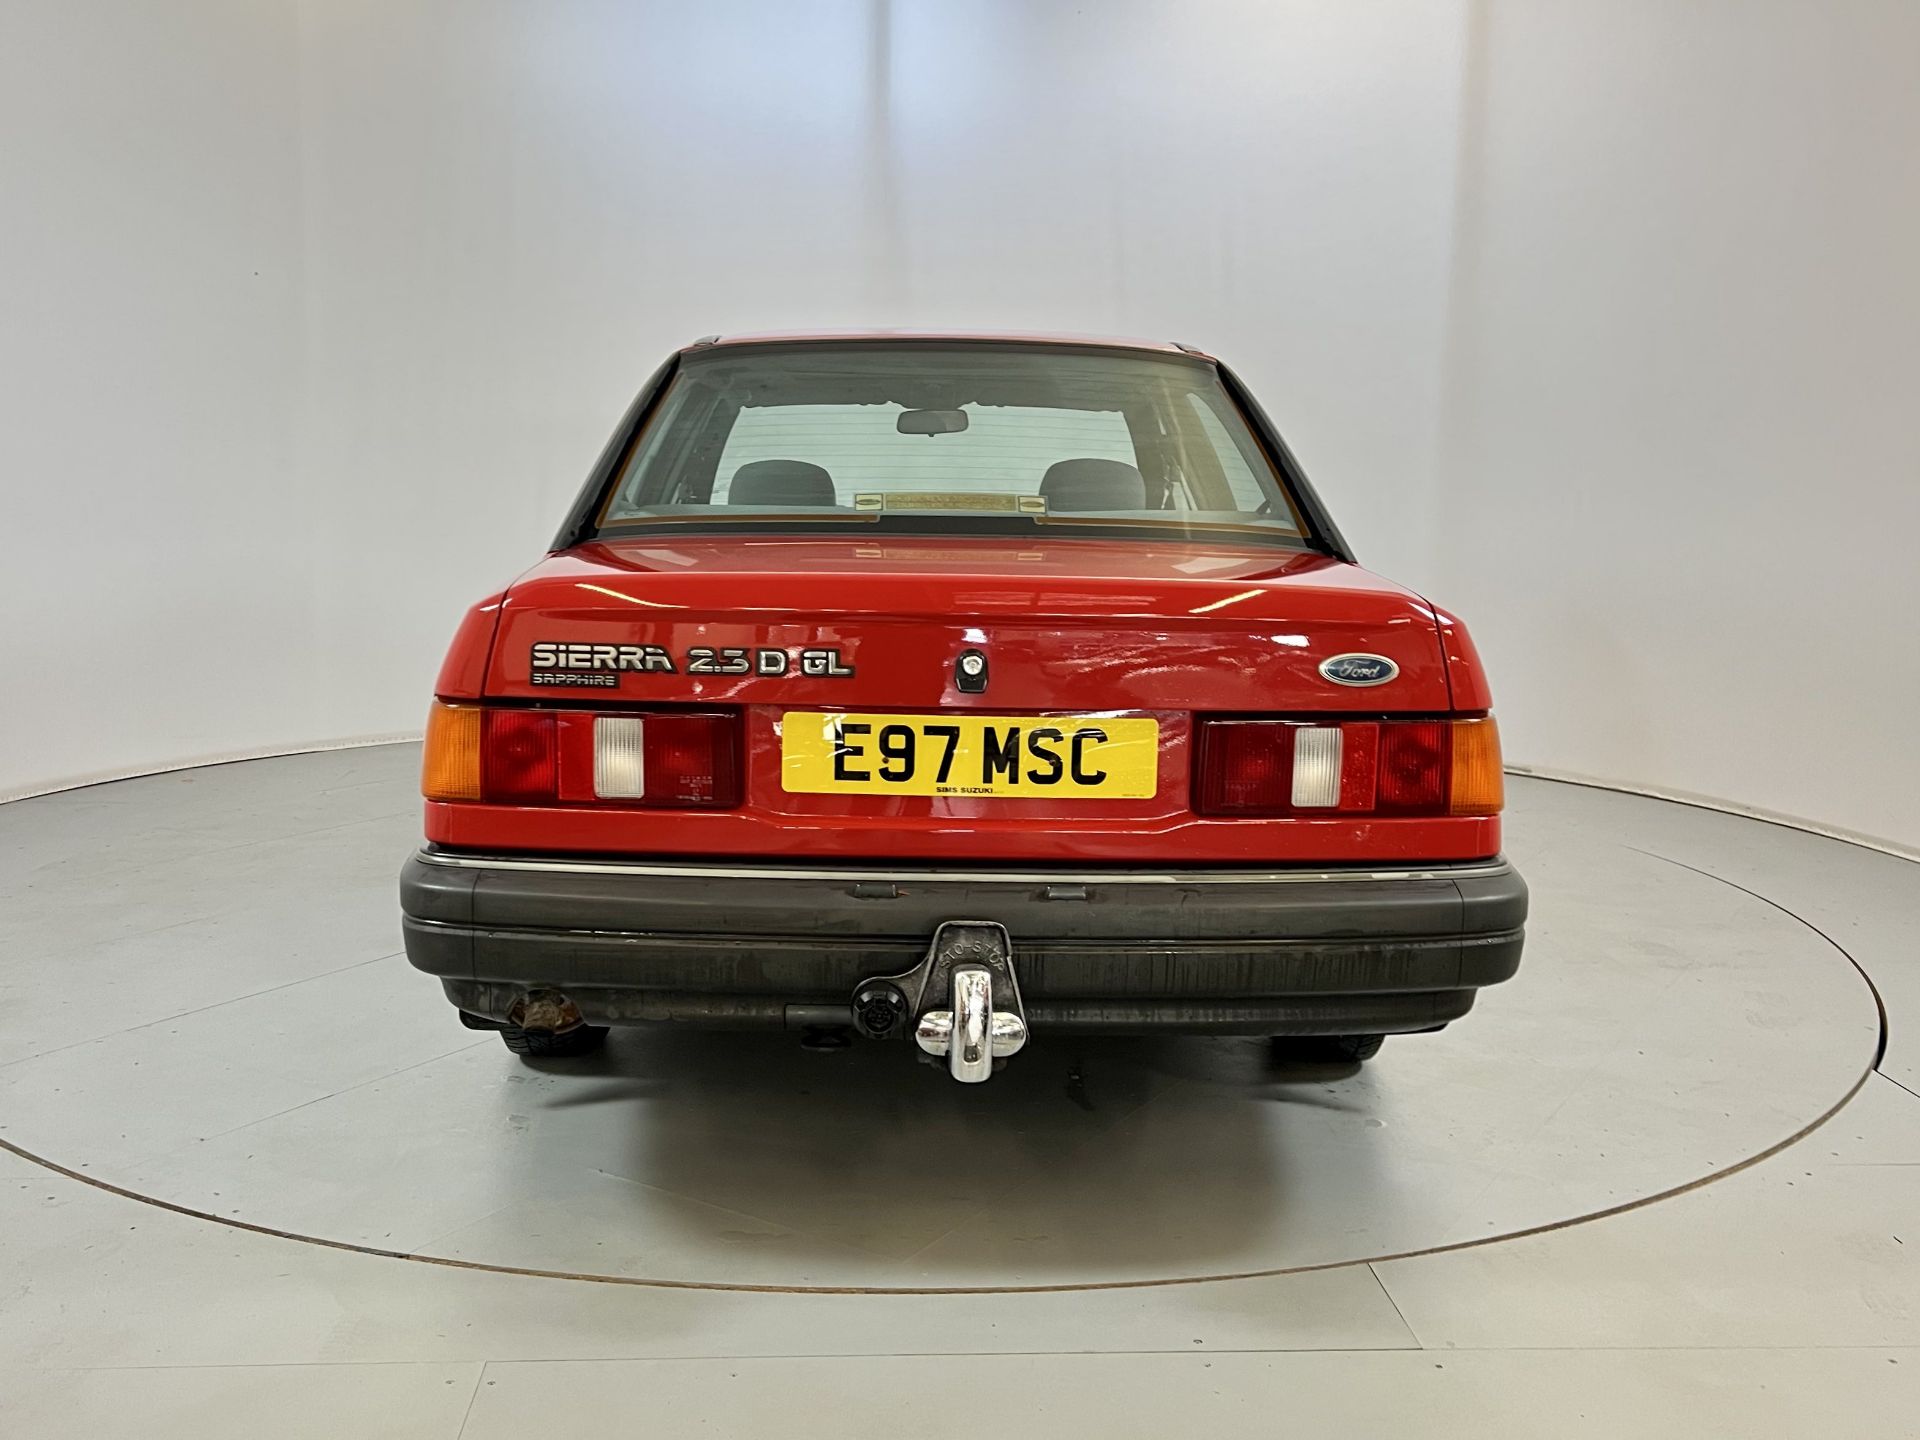 Ford Sierra Sapphire - Image 8 of 34